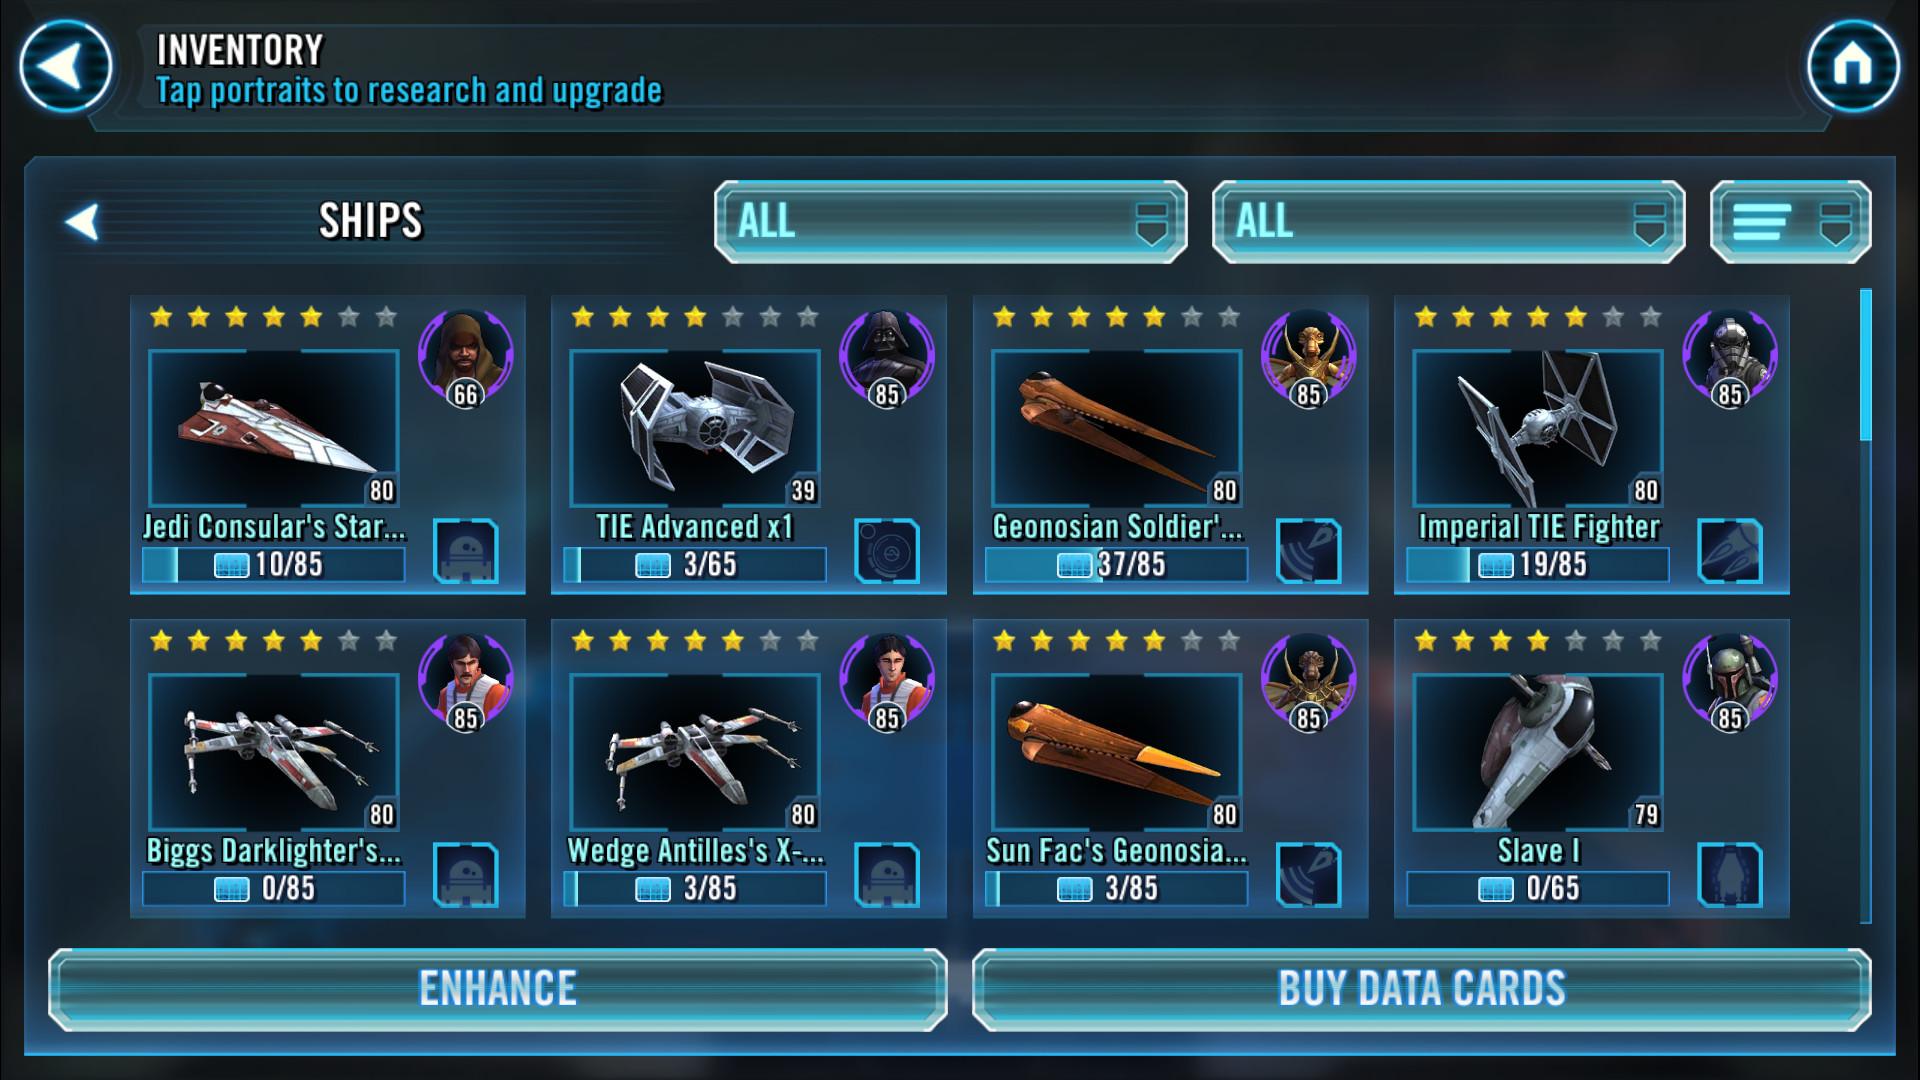 1920x1080 Finally got Tie Advanced and Slave 1, and on the same day. Thank you RNG  Jeebus!